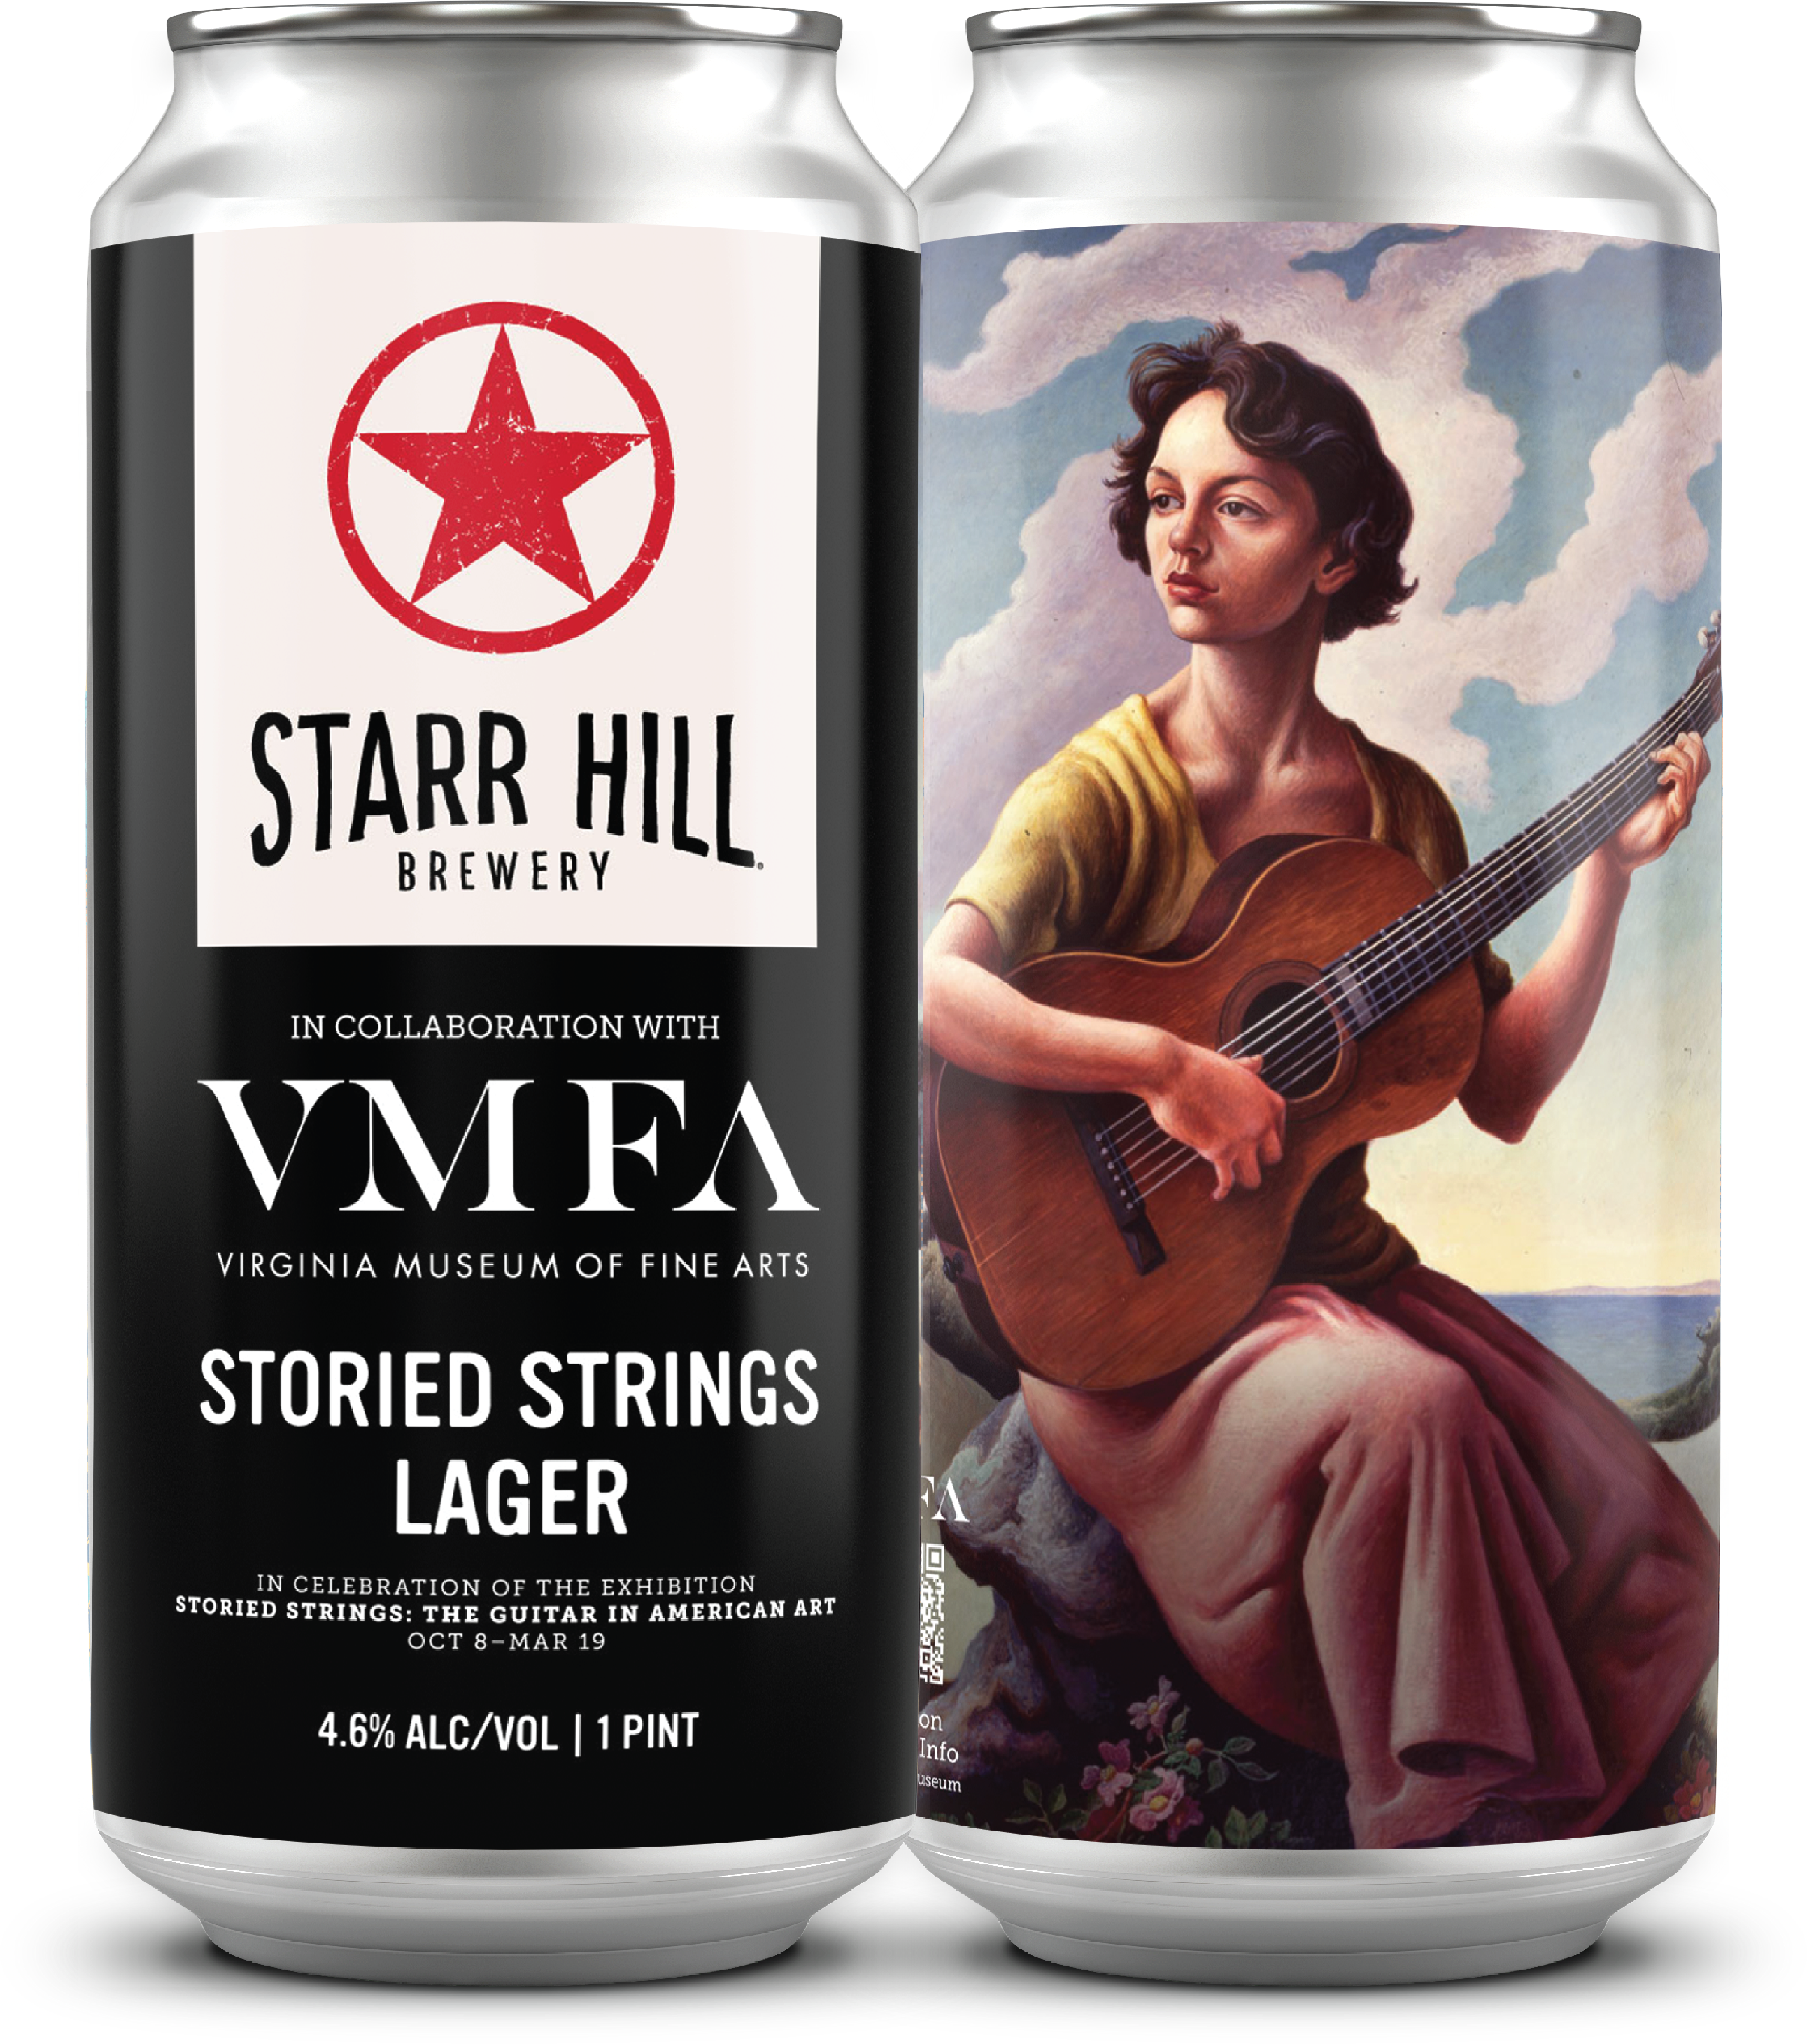 The Storied Strings Lager can features Thomas Hart Benton’s Jessie with Guitar (1957), a painting included in VMFA’s upcoming exhibition Storied Strings: The Guitar in American Art